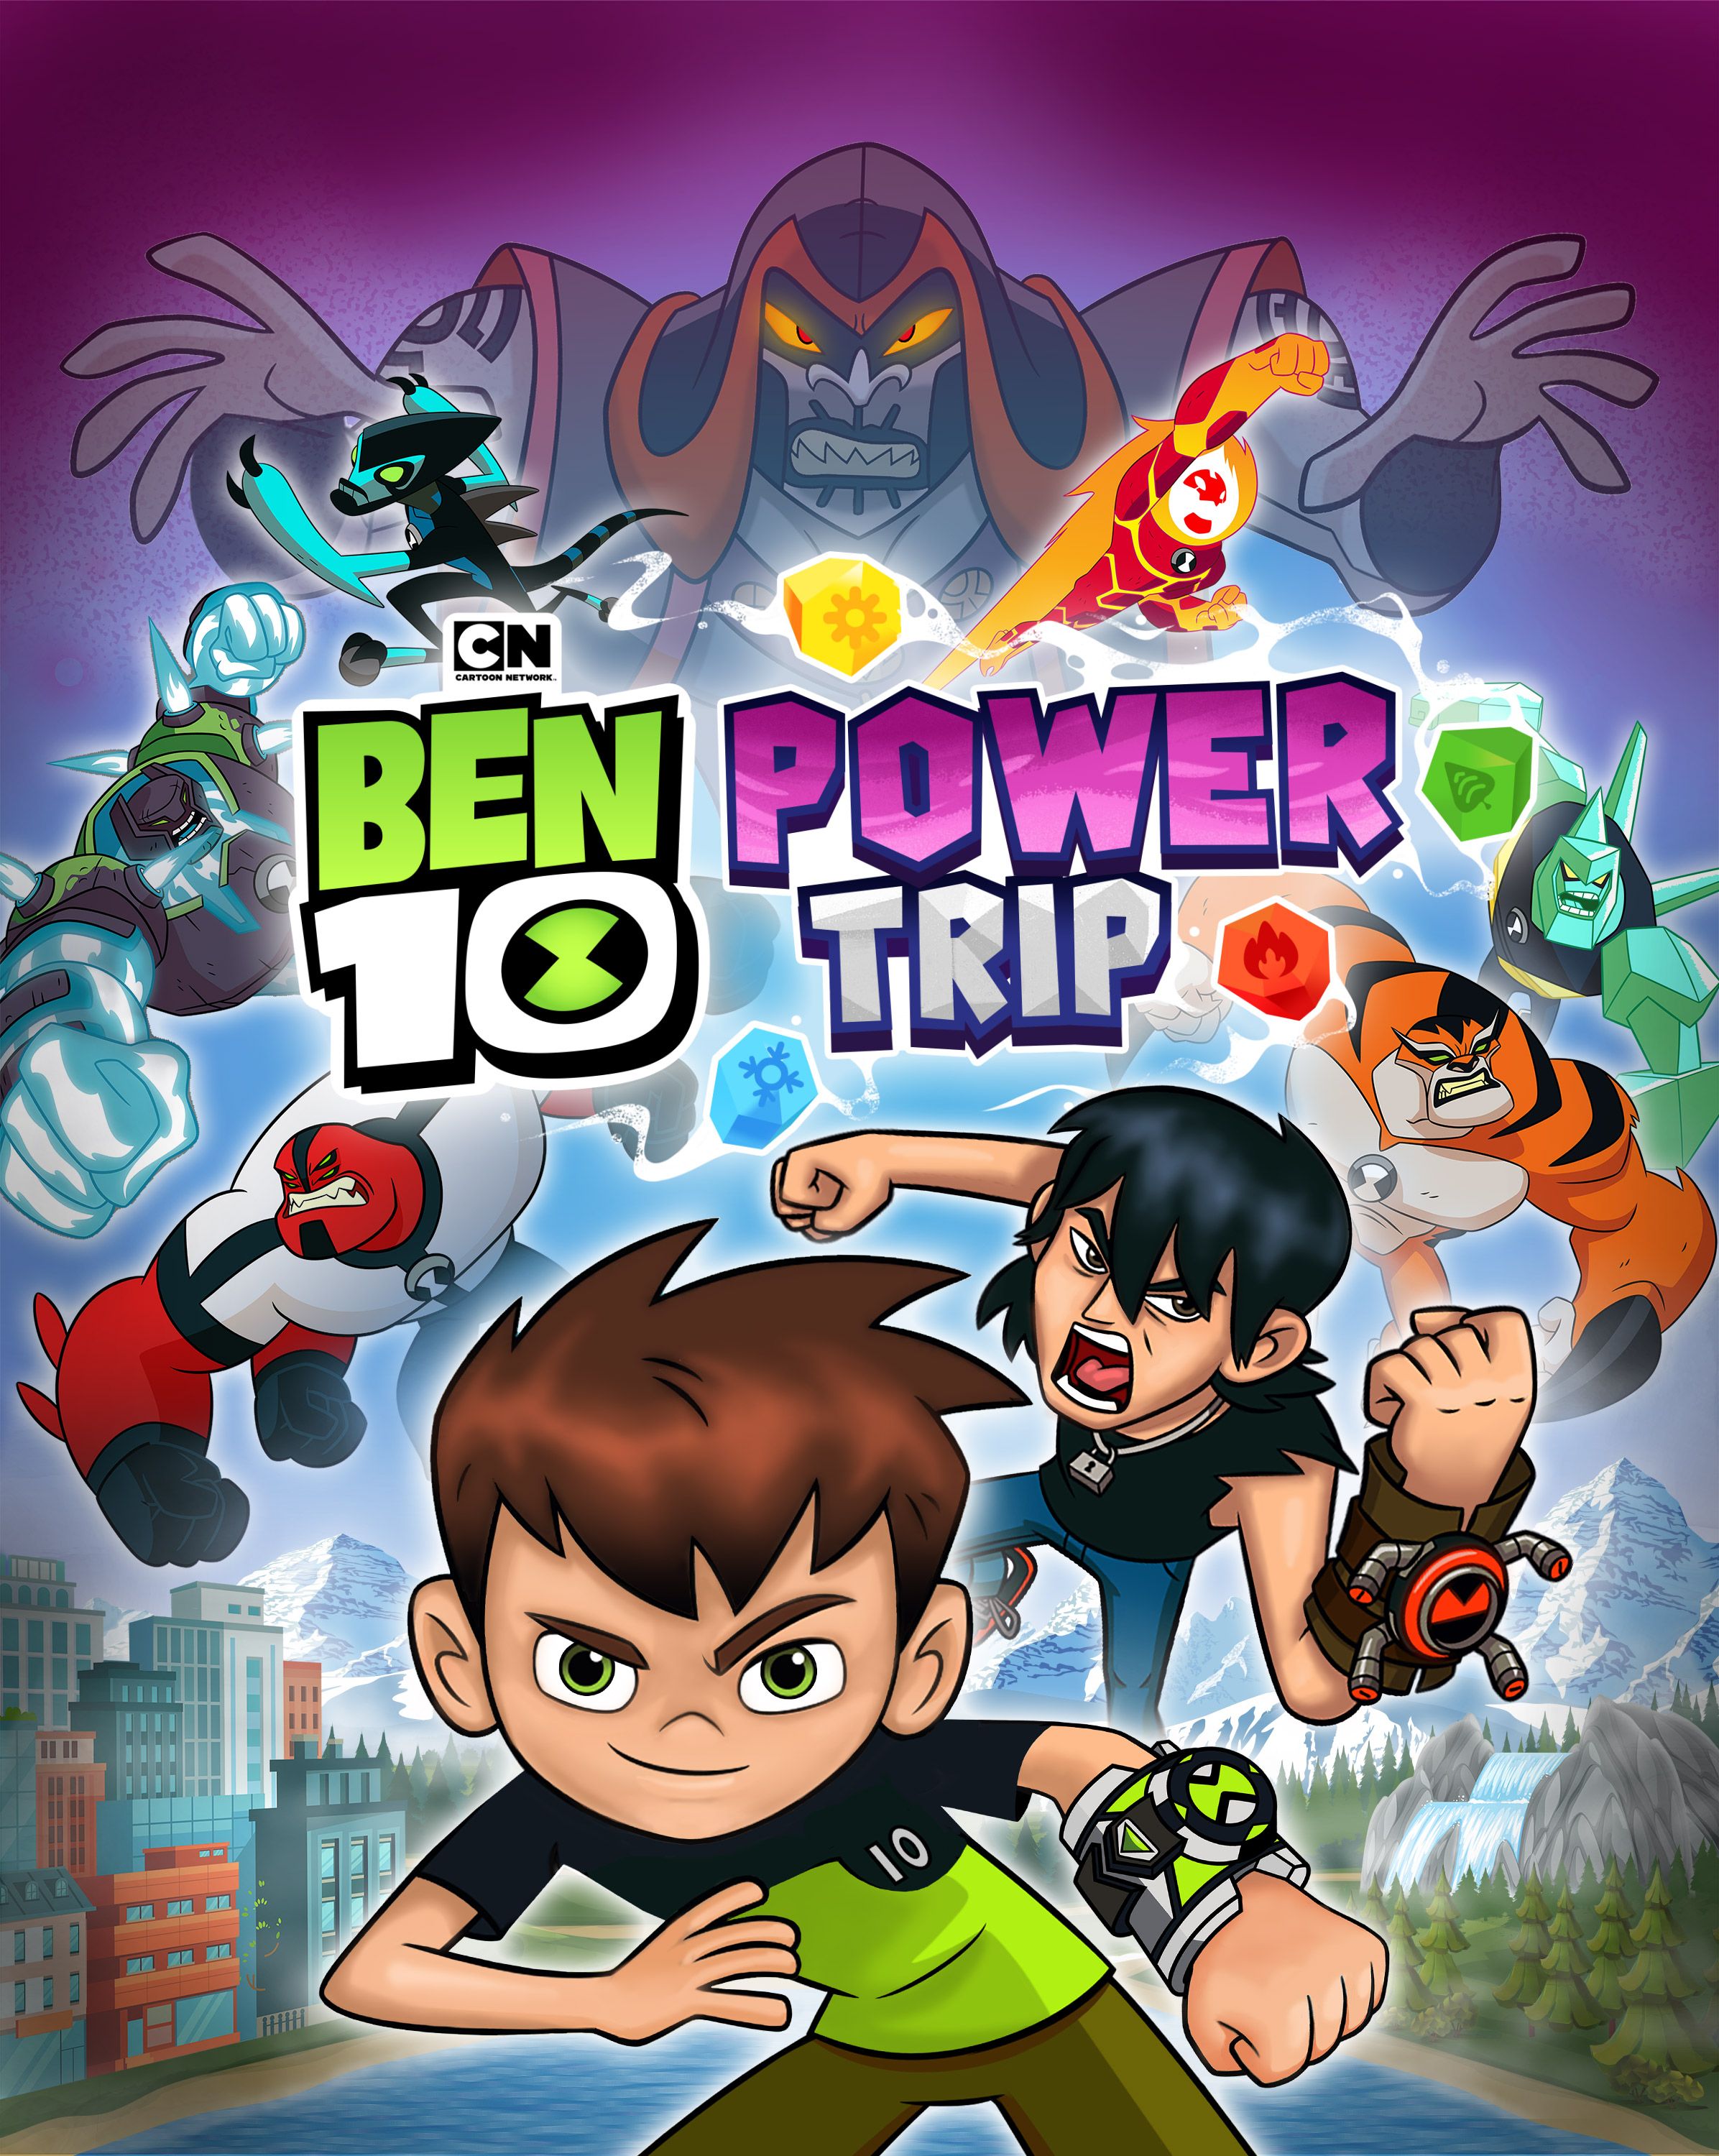 Ben 10 Power Trip is announced for October